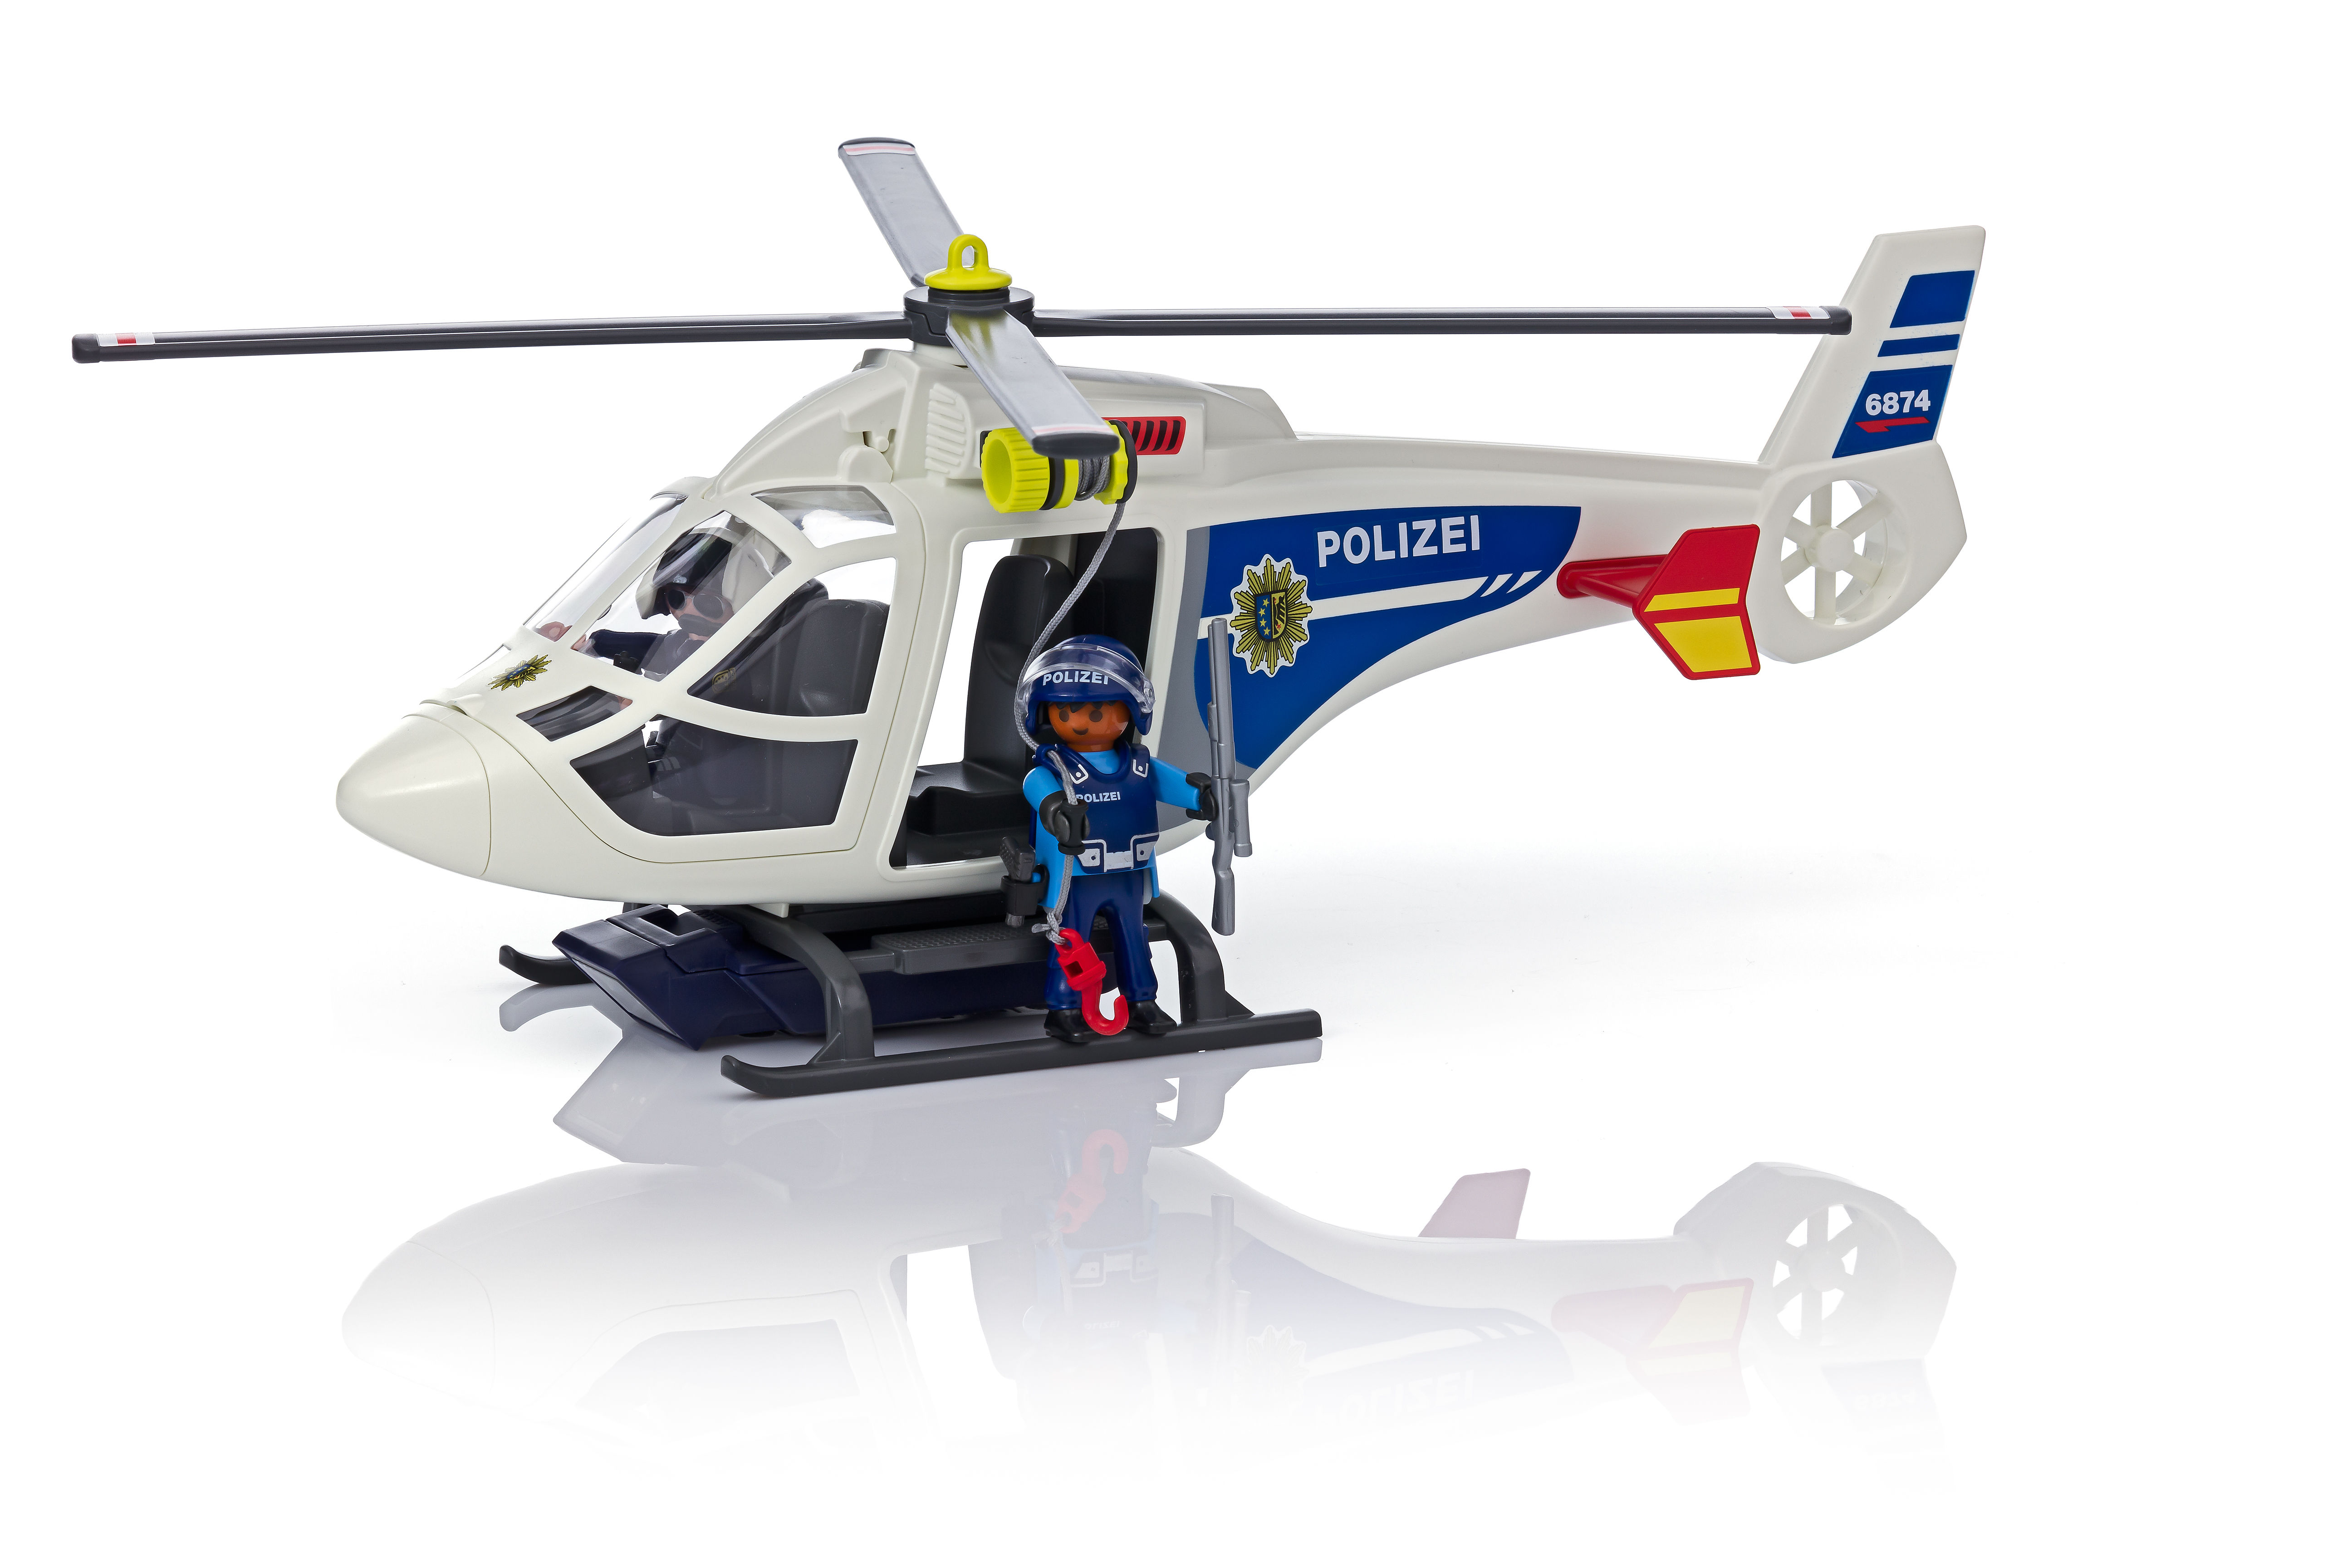 Police Helicopter with LED Searchlight - 6874 - Playmobil